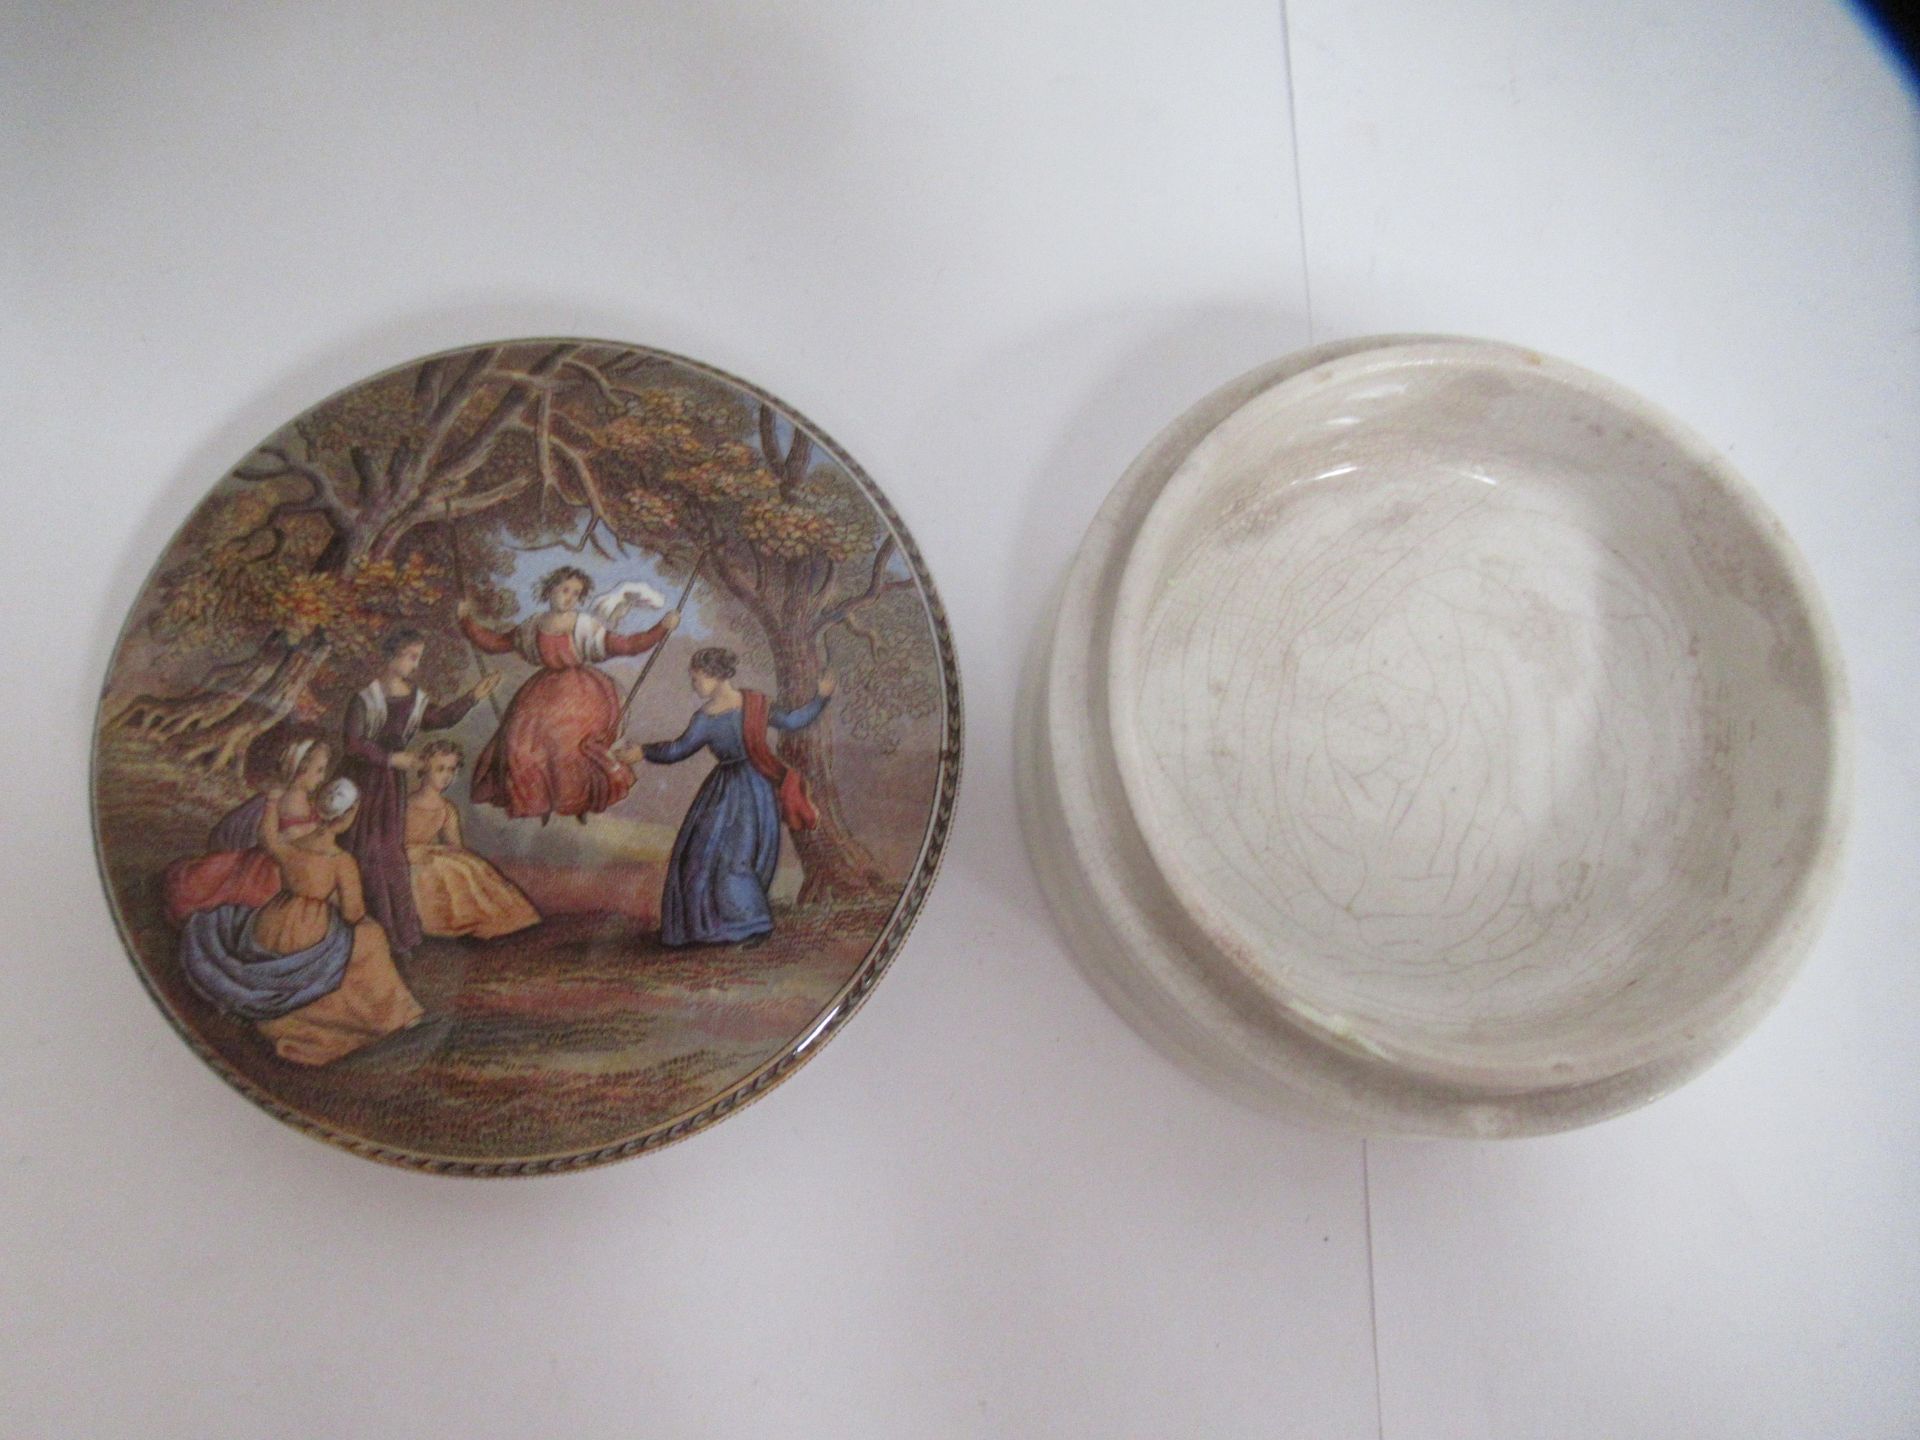 6x Prattware ceramic lids including 'On Guard', 'The Rivals', 'The Cavalier', and 'Peace' - Image 2 of 37